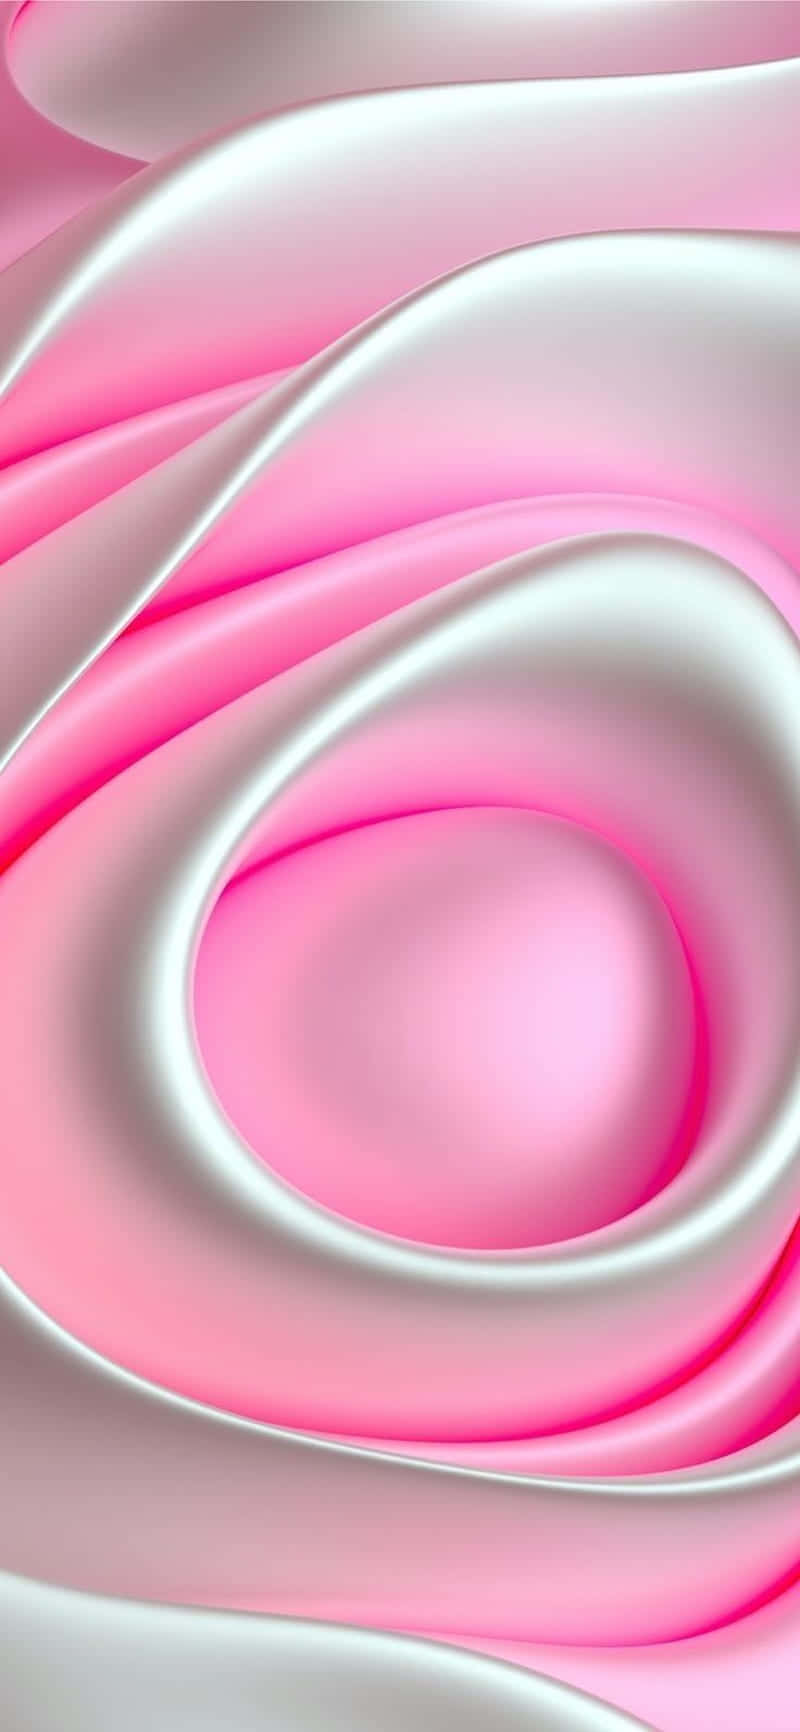 Pink And White Abstract Background Wallpaper